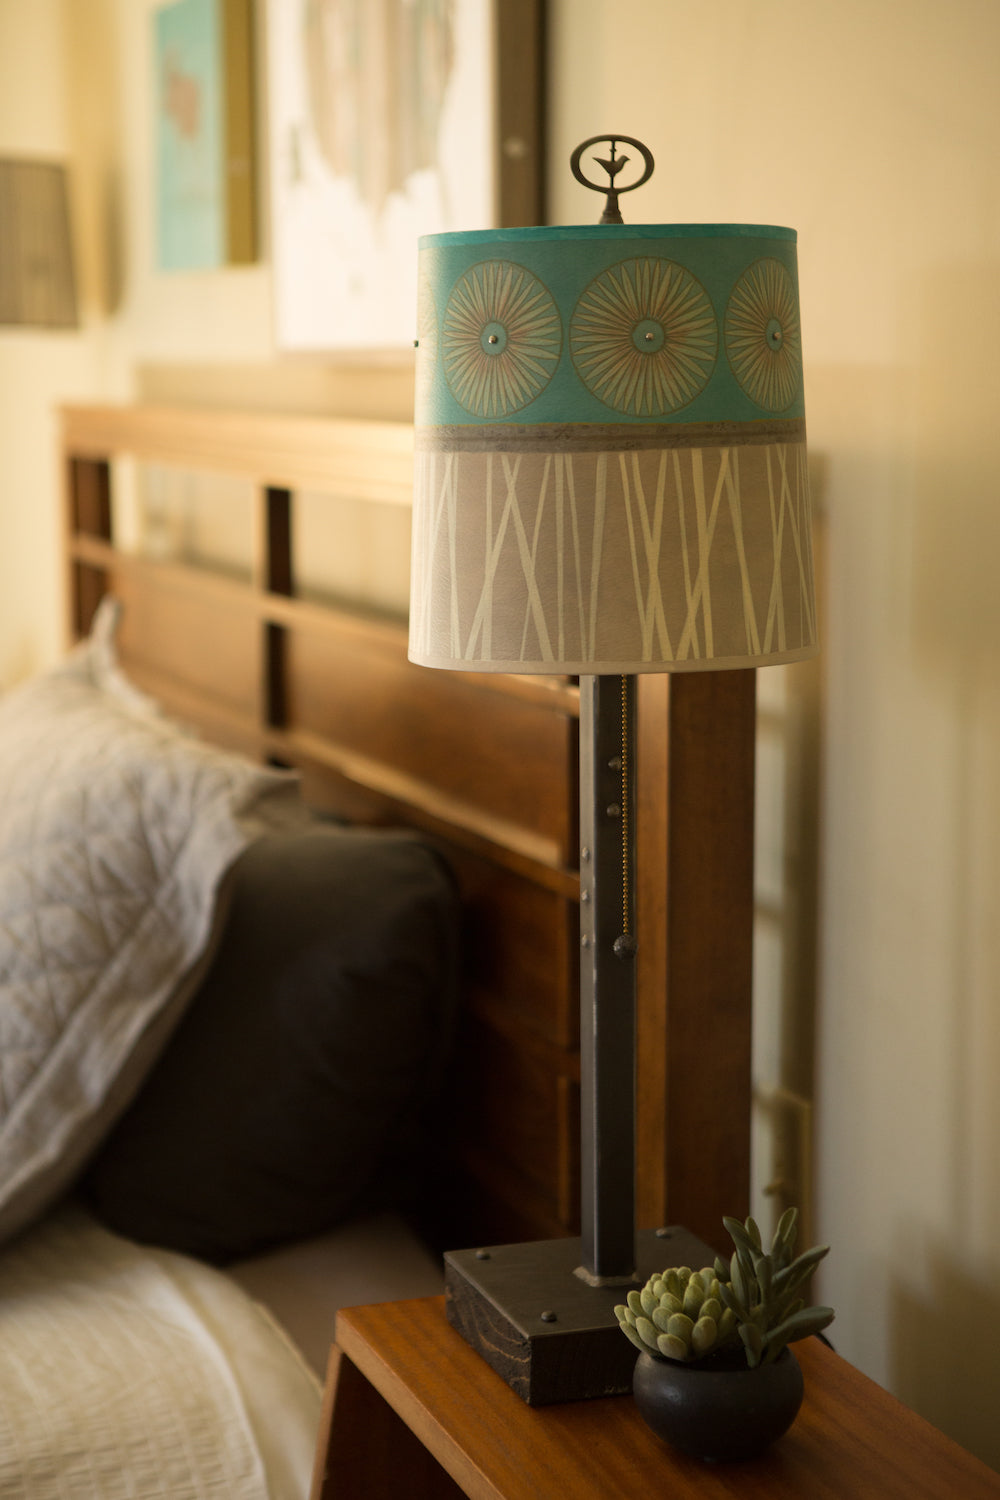 Janna Ugone & Co Table Lamps Steel Table Lamp on Wood with Medium Drum Shade in Pool